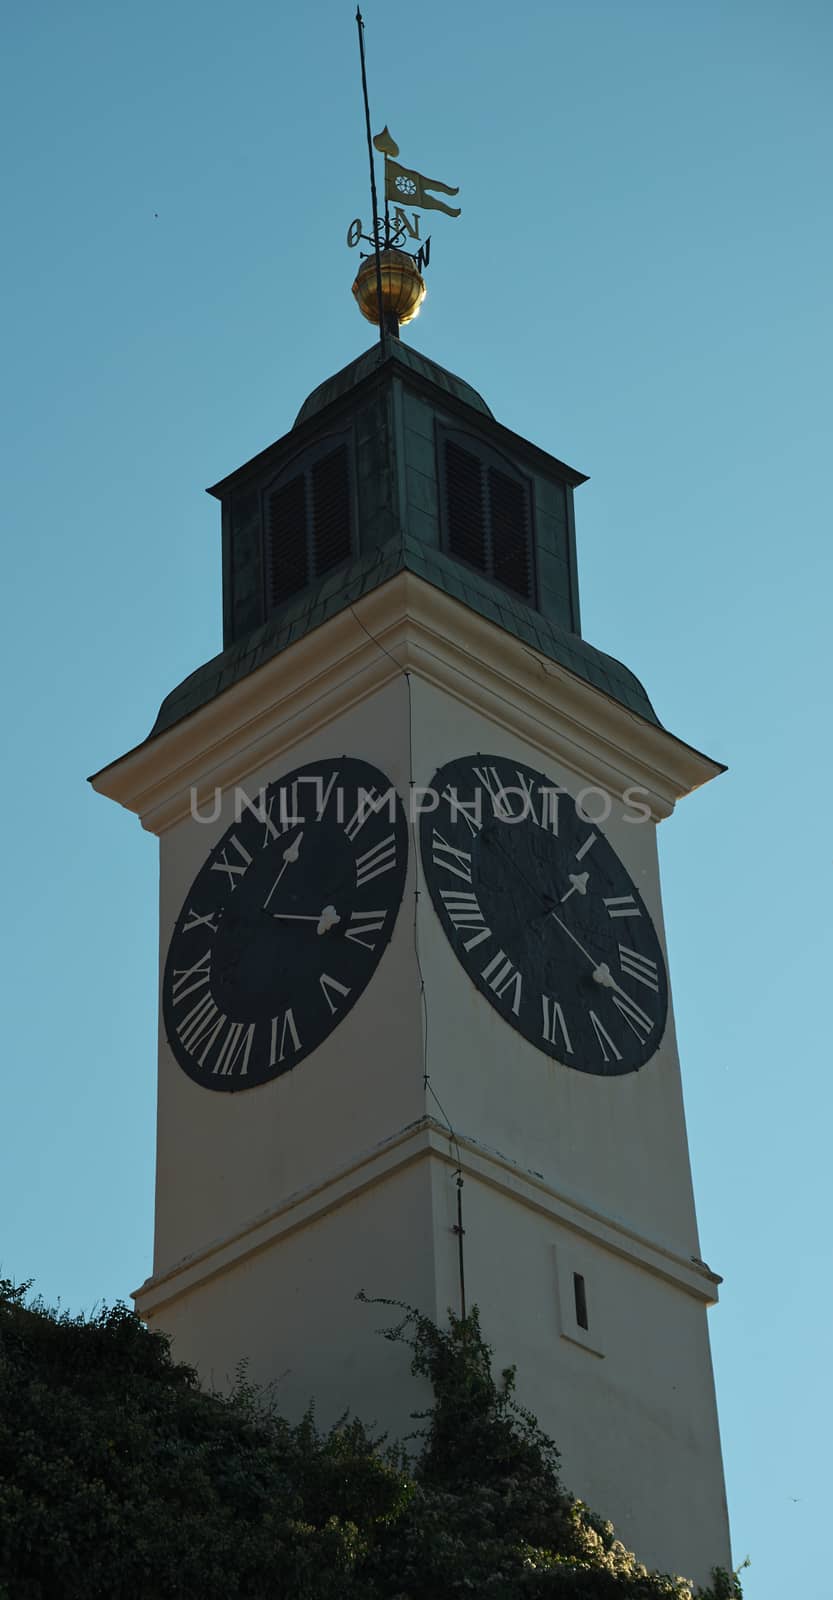 Clock tower with small bell tower at top in Novi Sad, Serbia by sheriffkule